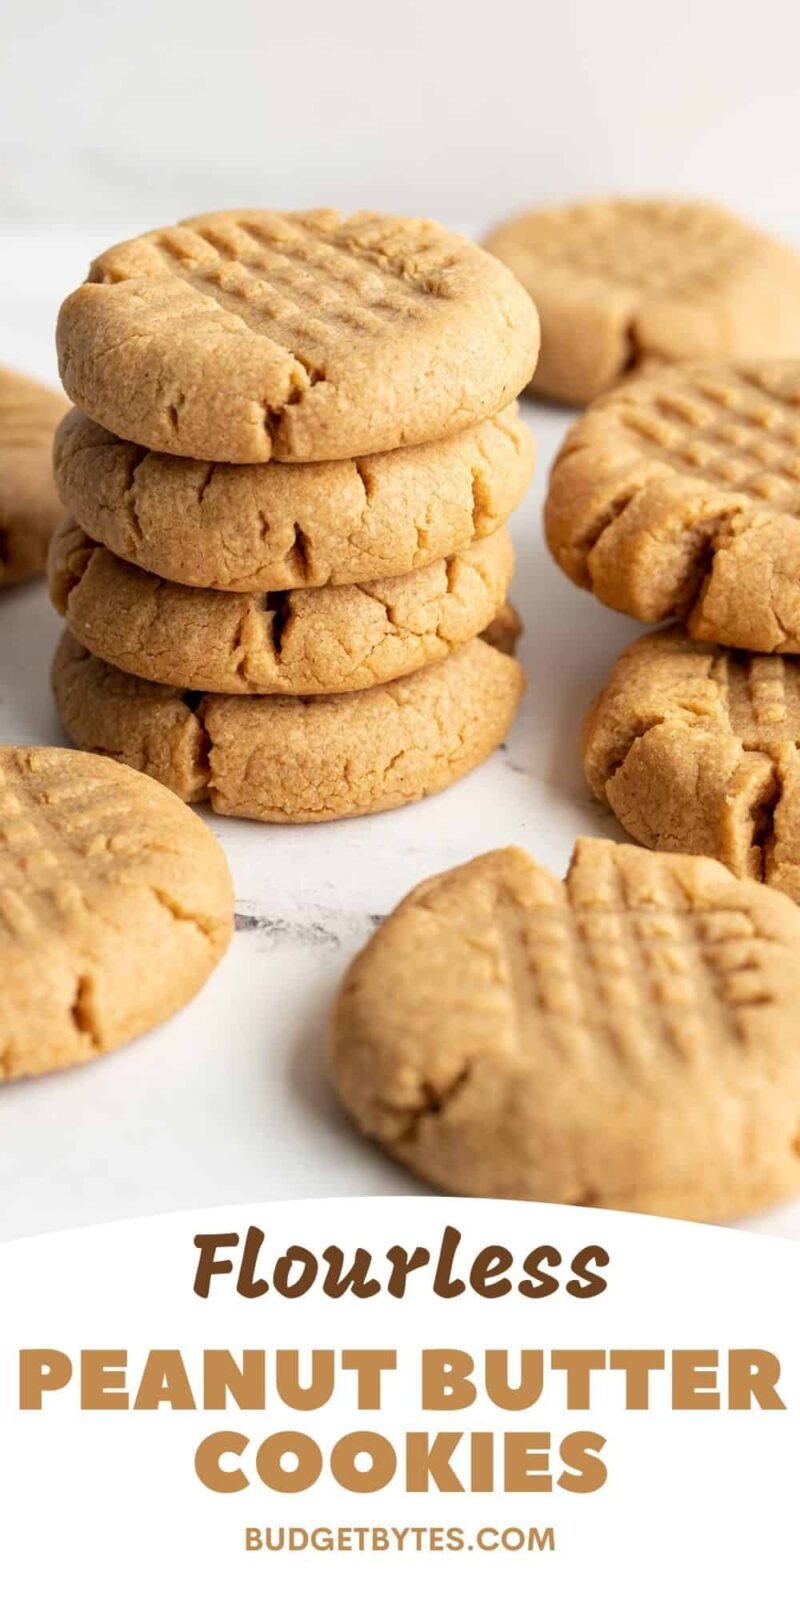 A stack of peanut butter cokies, title text at the bottom